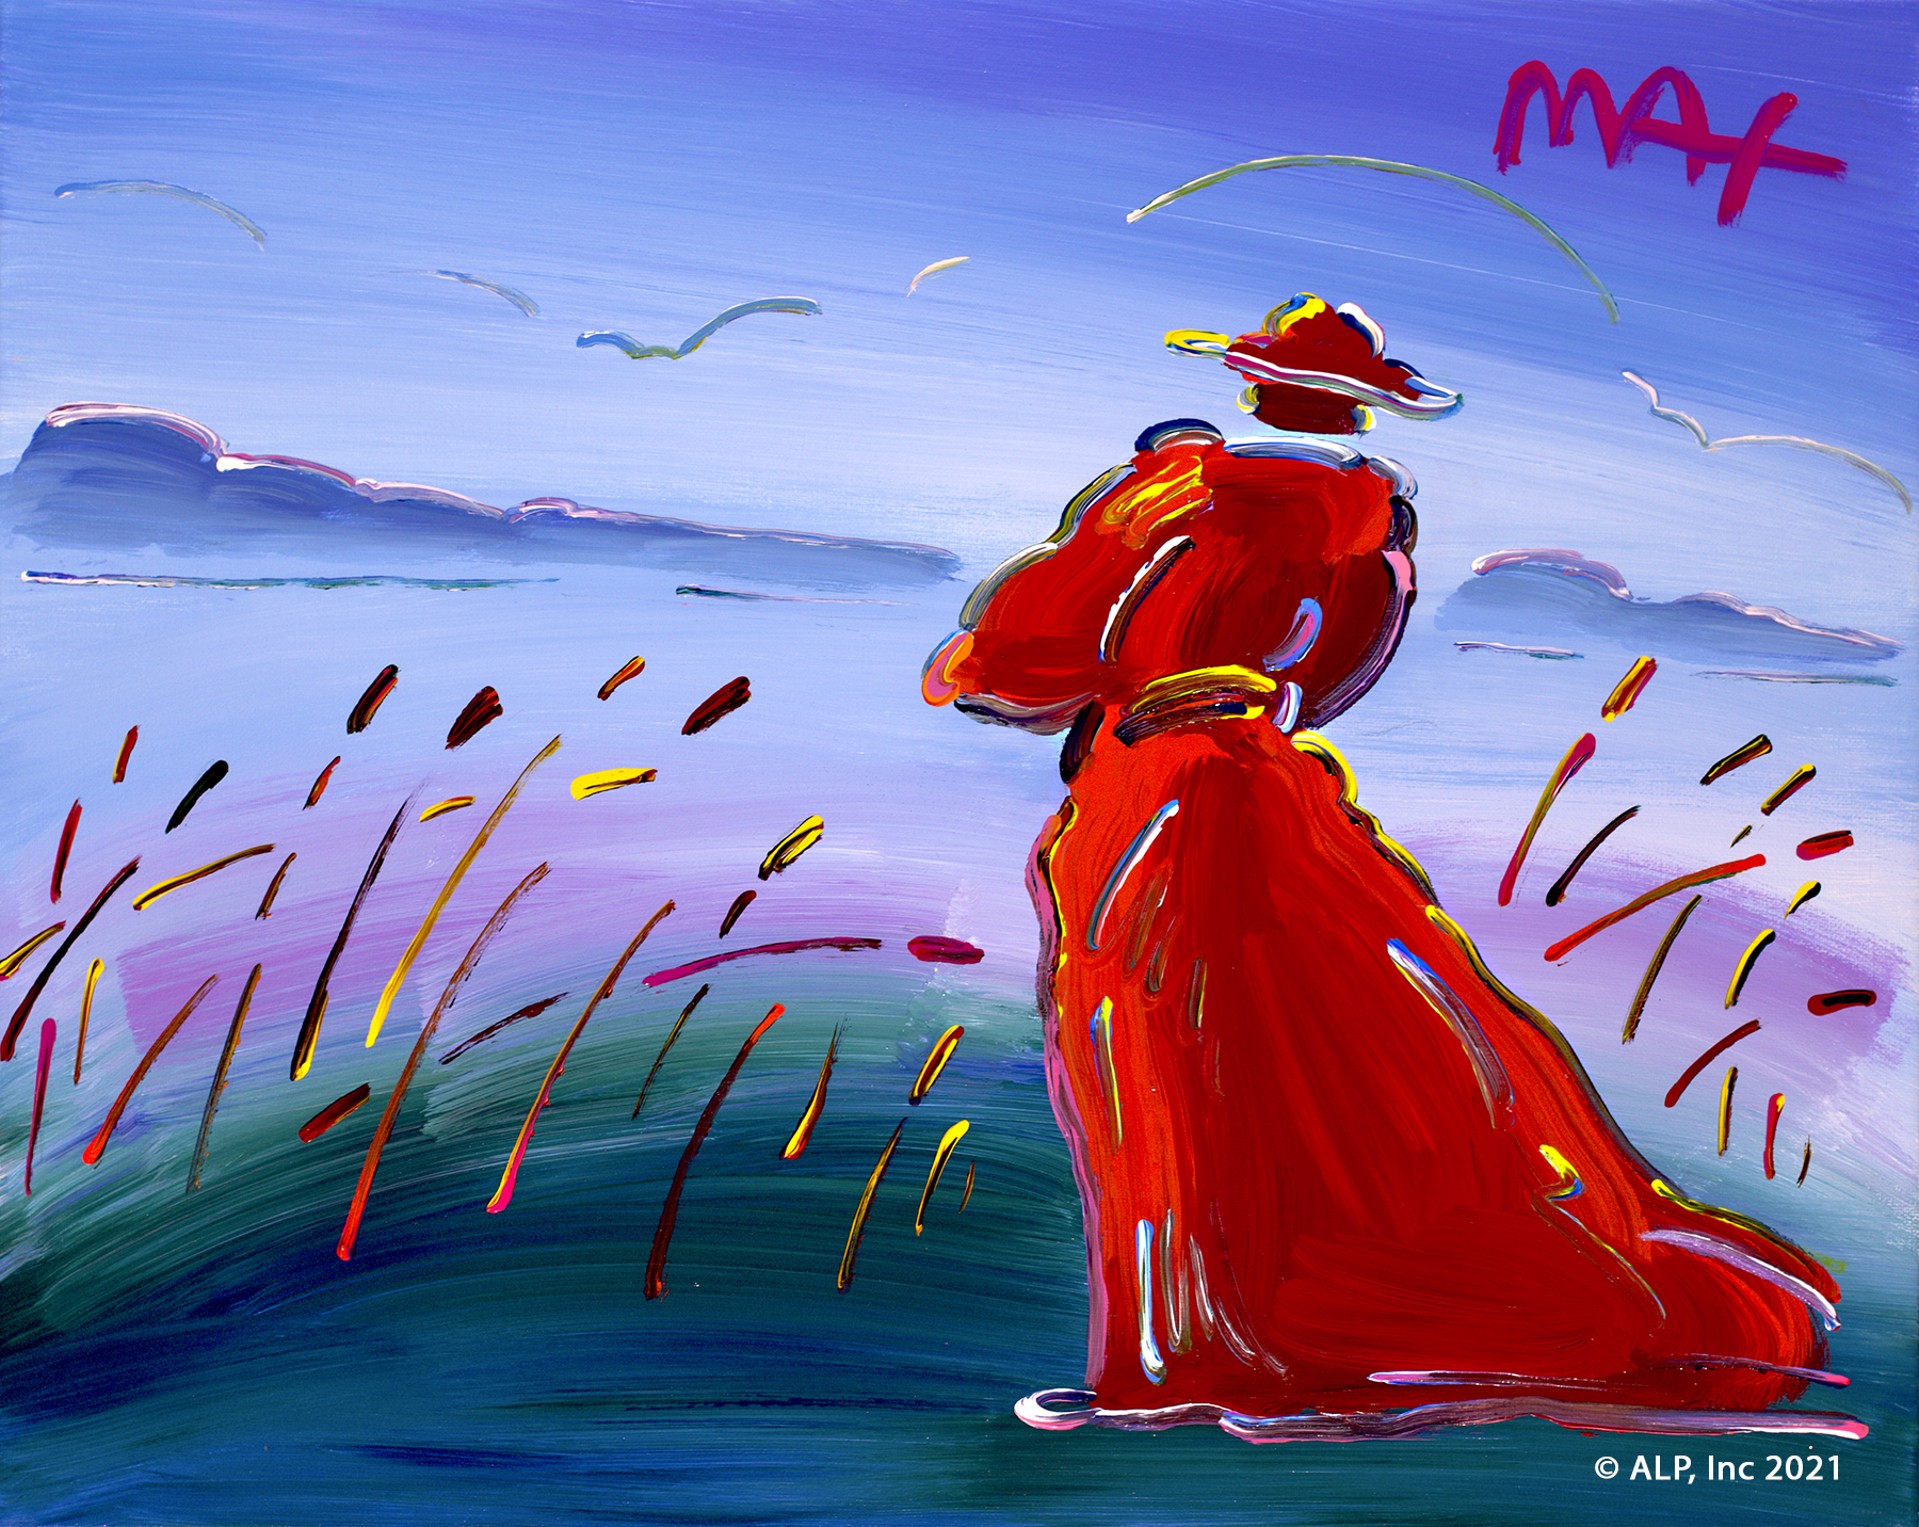 Walking in Reeds by Peter Max